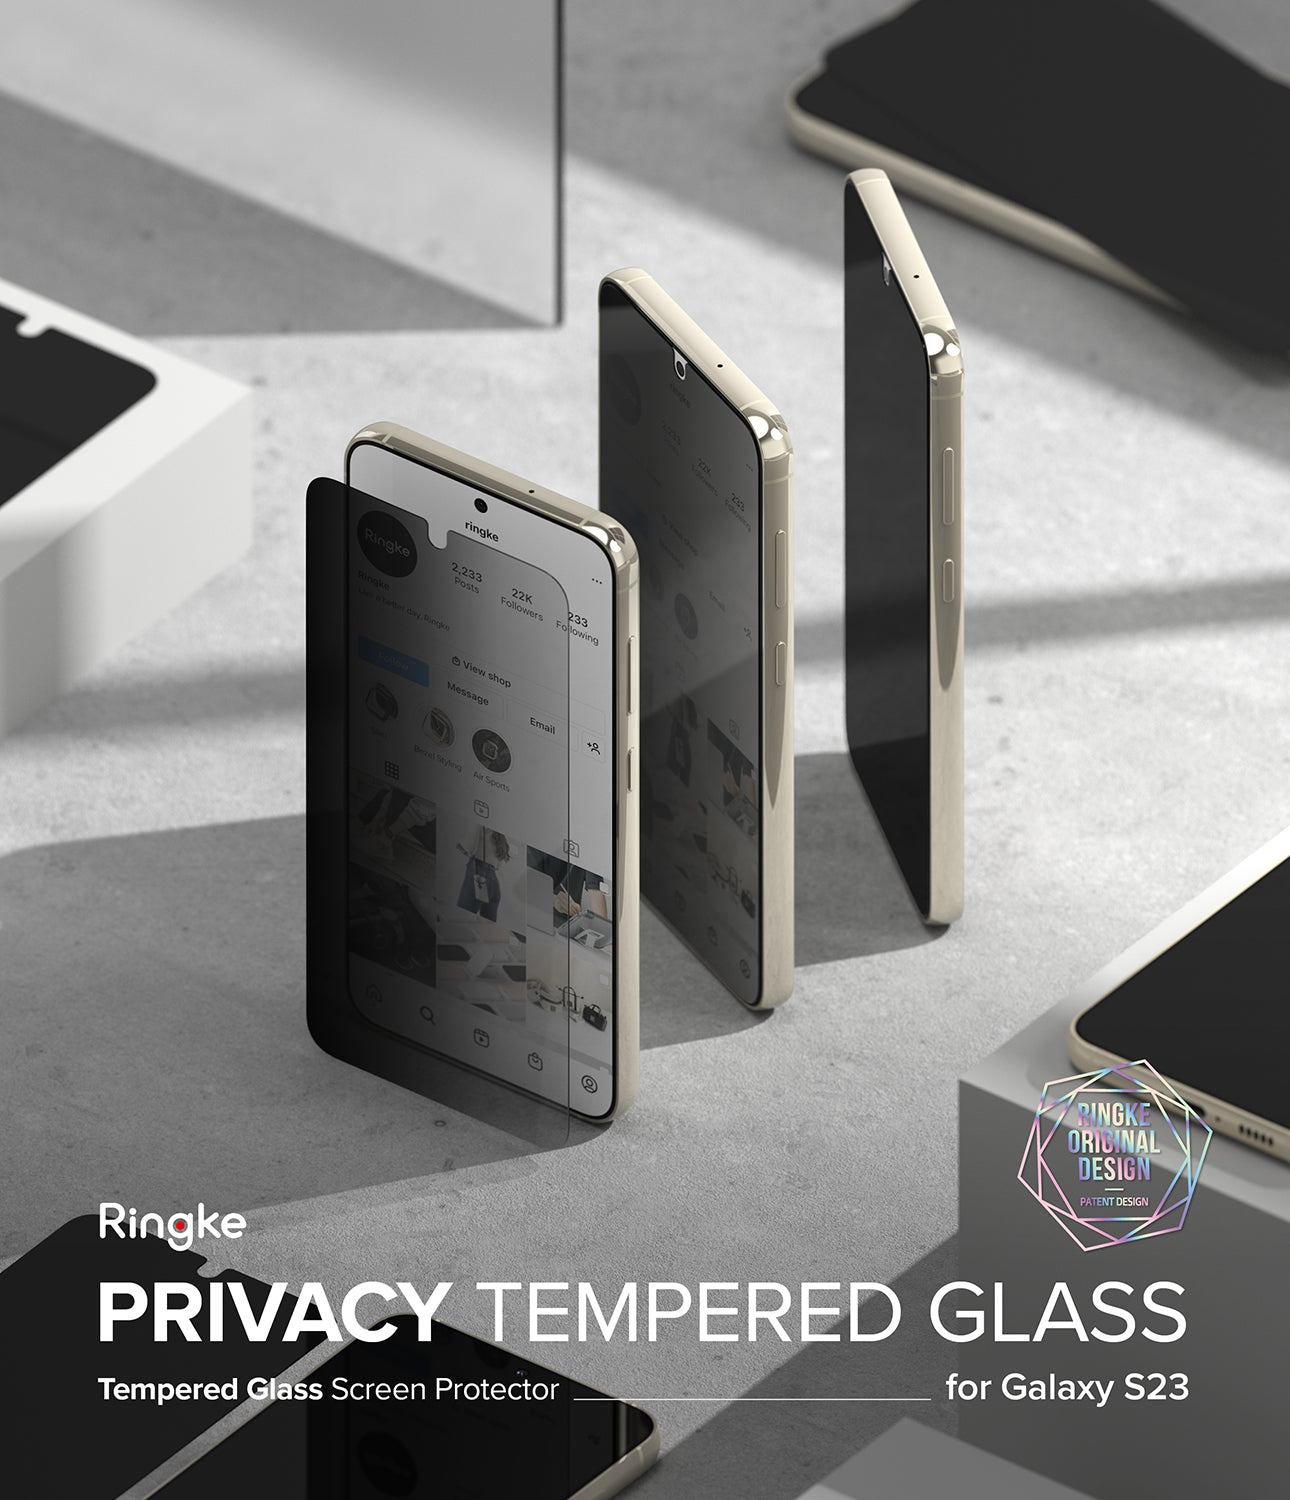 Ringke l Privacy Tempered Glass for Galaxy S23